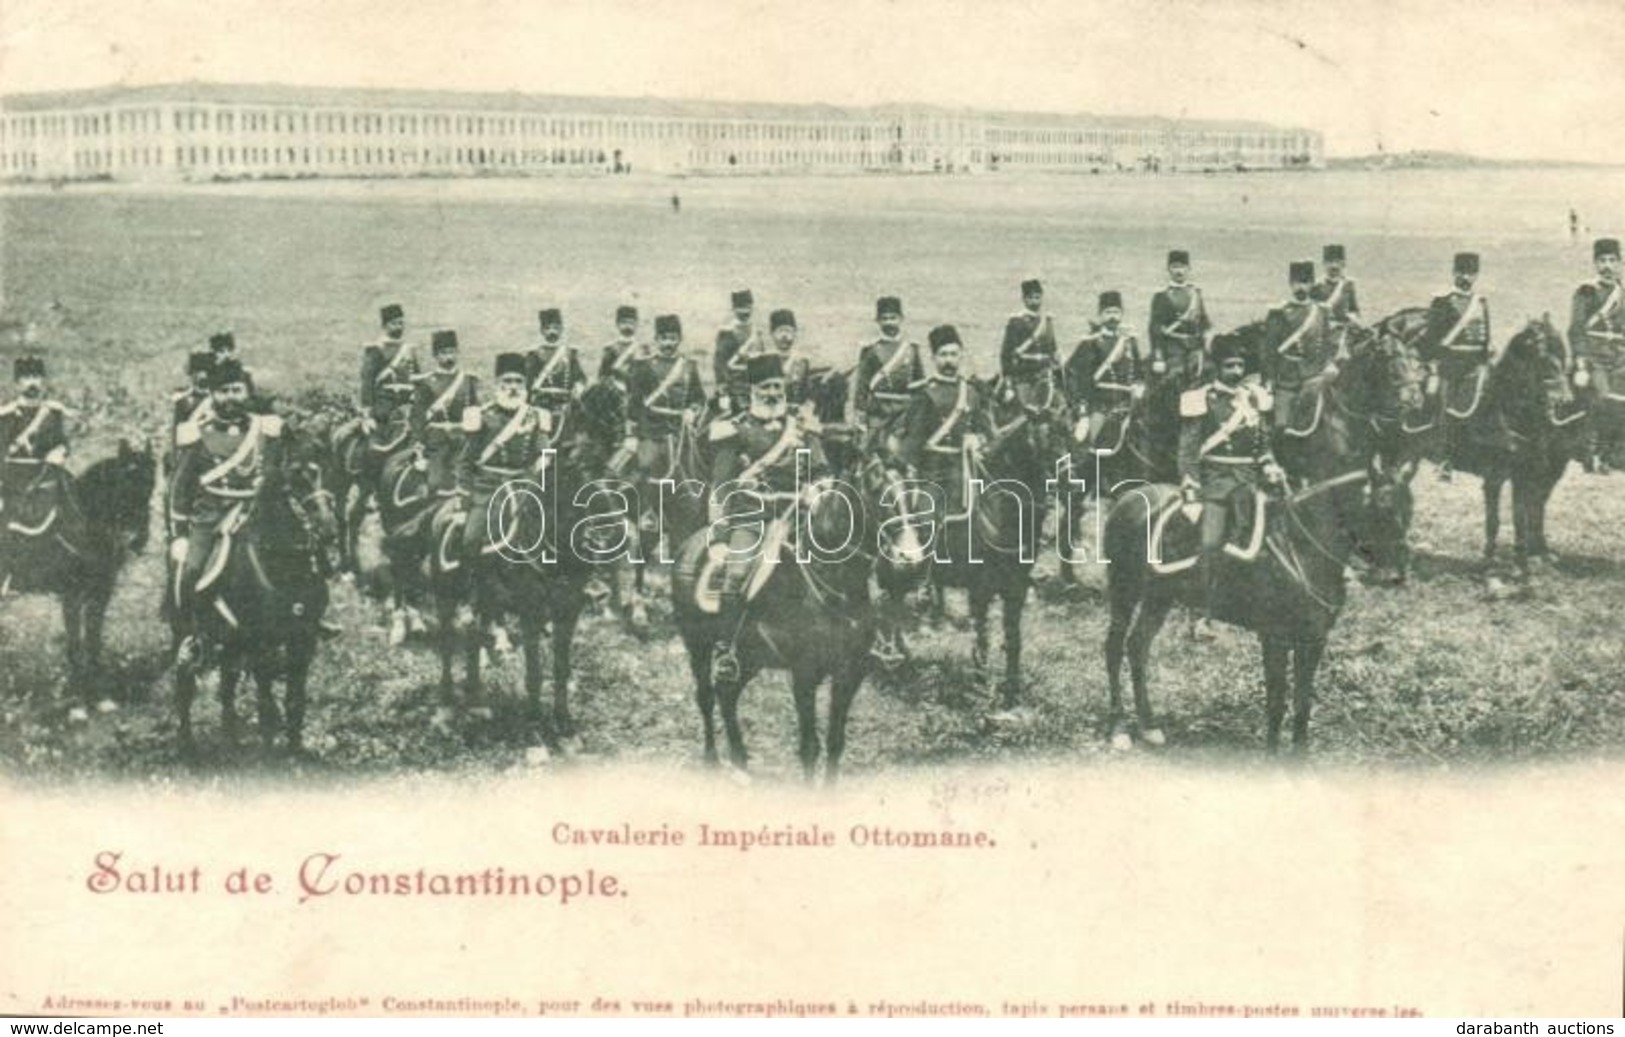 T3 Constantinople, Istanbul; Cavalerie Impériale Ottomane / Ottoman Imperial Cavalry, Turkish Military (r) - Unclassified